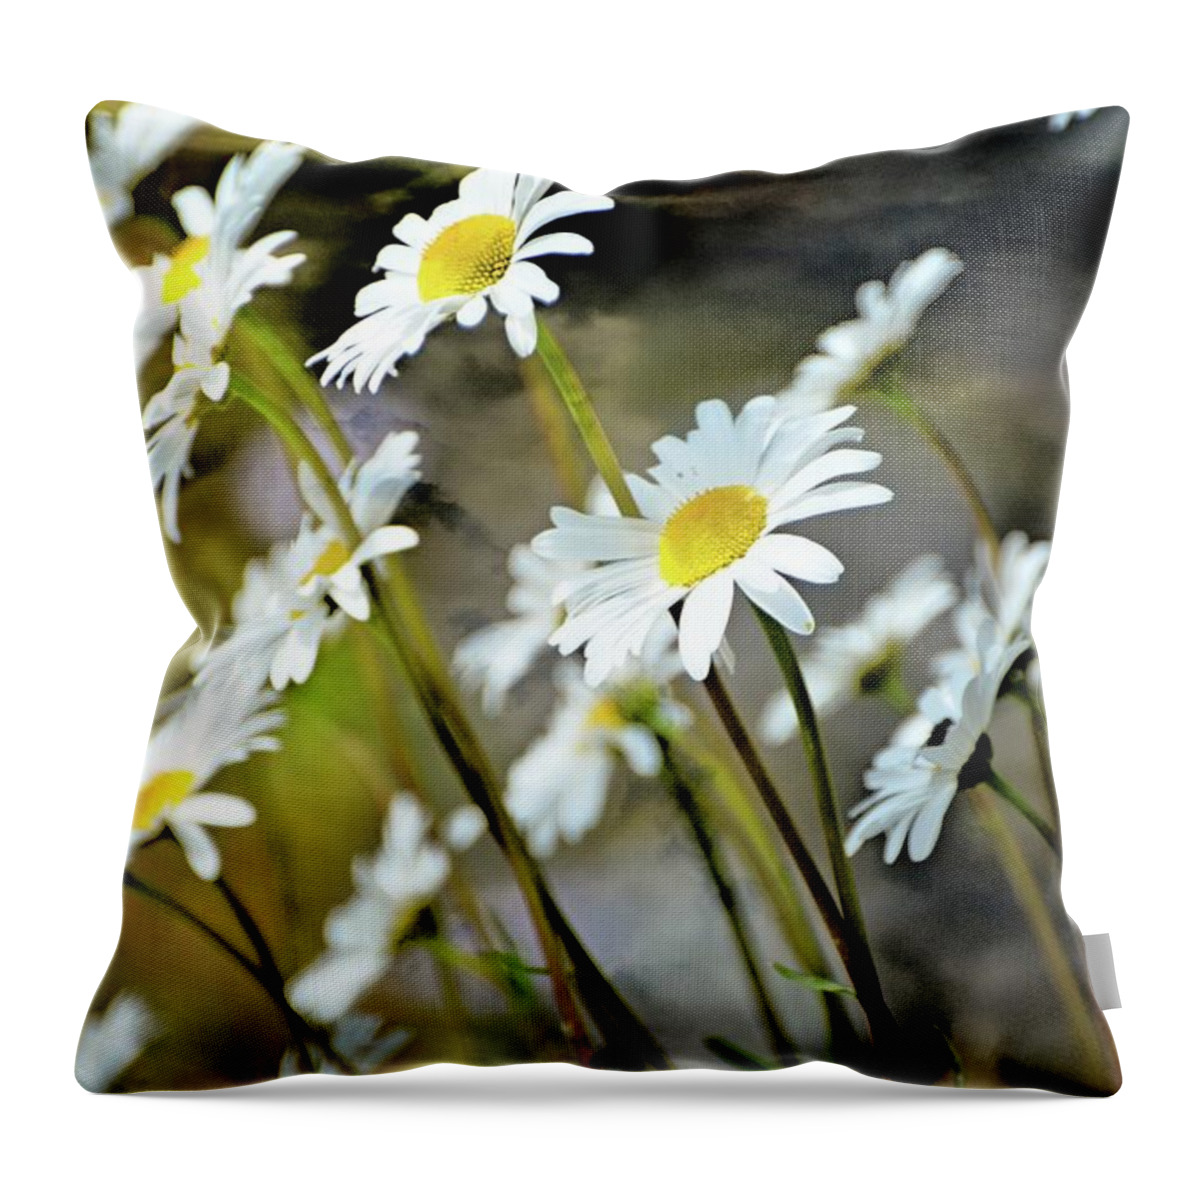 Wildflowers Throw Pillow featuring the photograph Glacier Wildflowers by Marty Koch